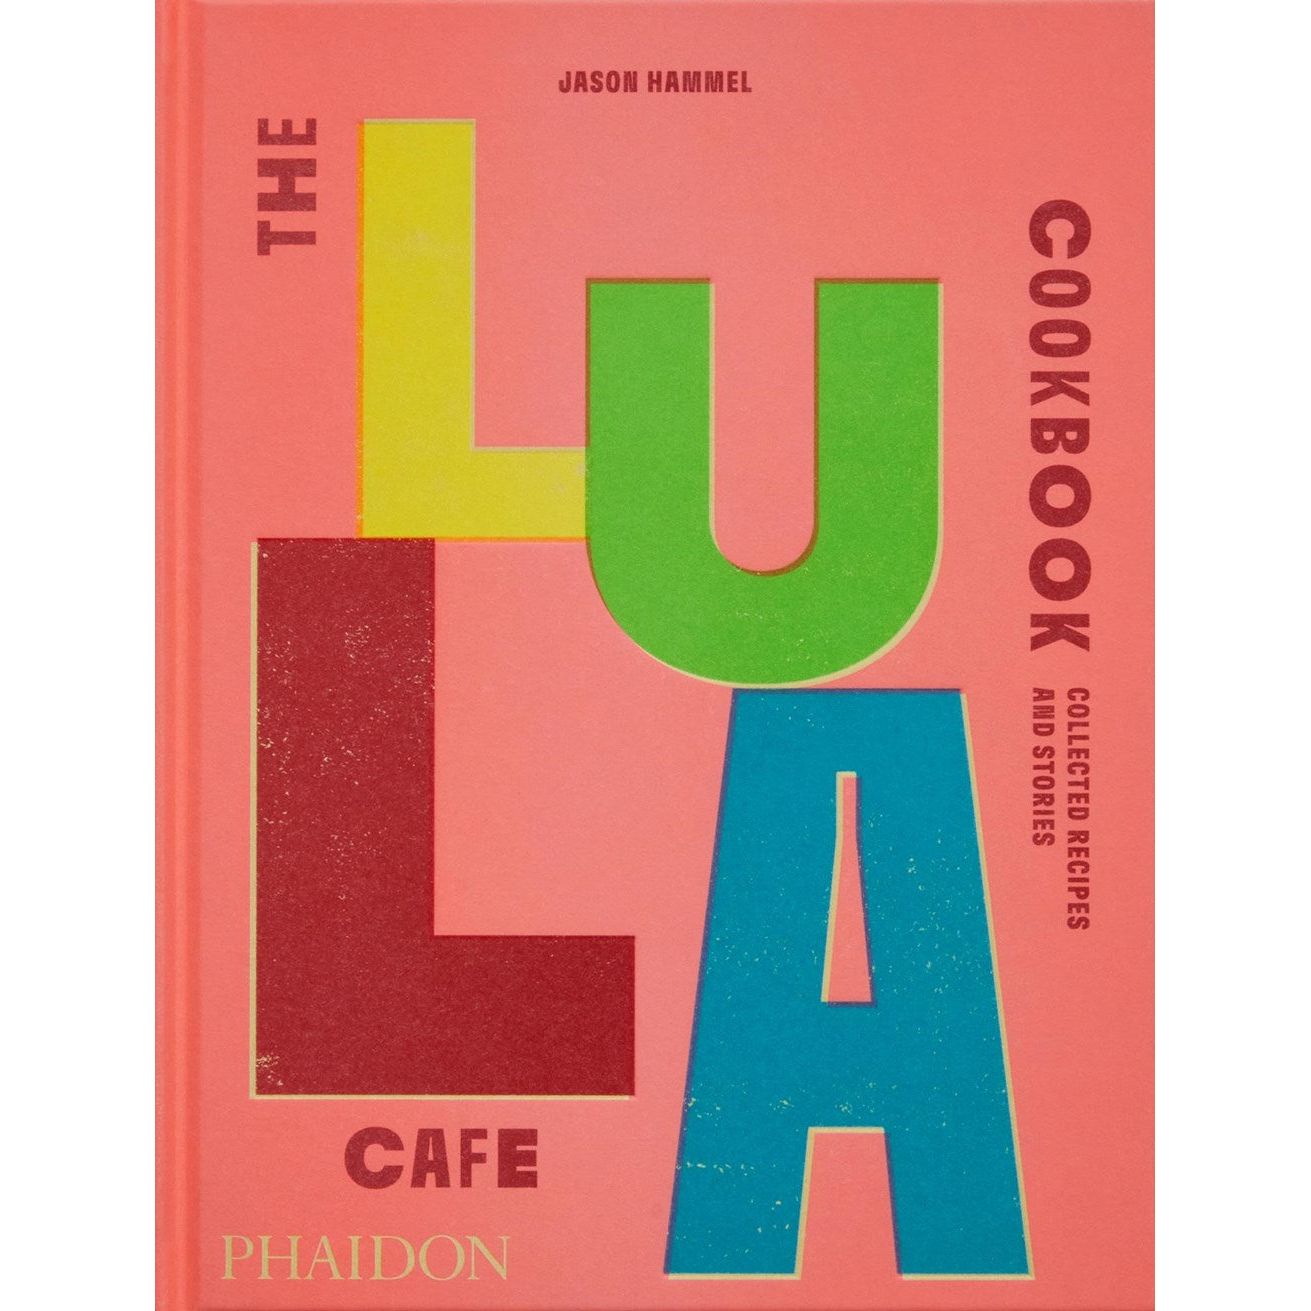 The Lula Cafe Cookbook : Collected Recipes and Stories (Jason Hammel)